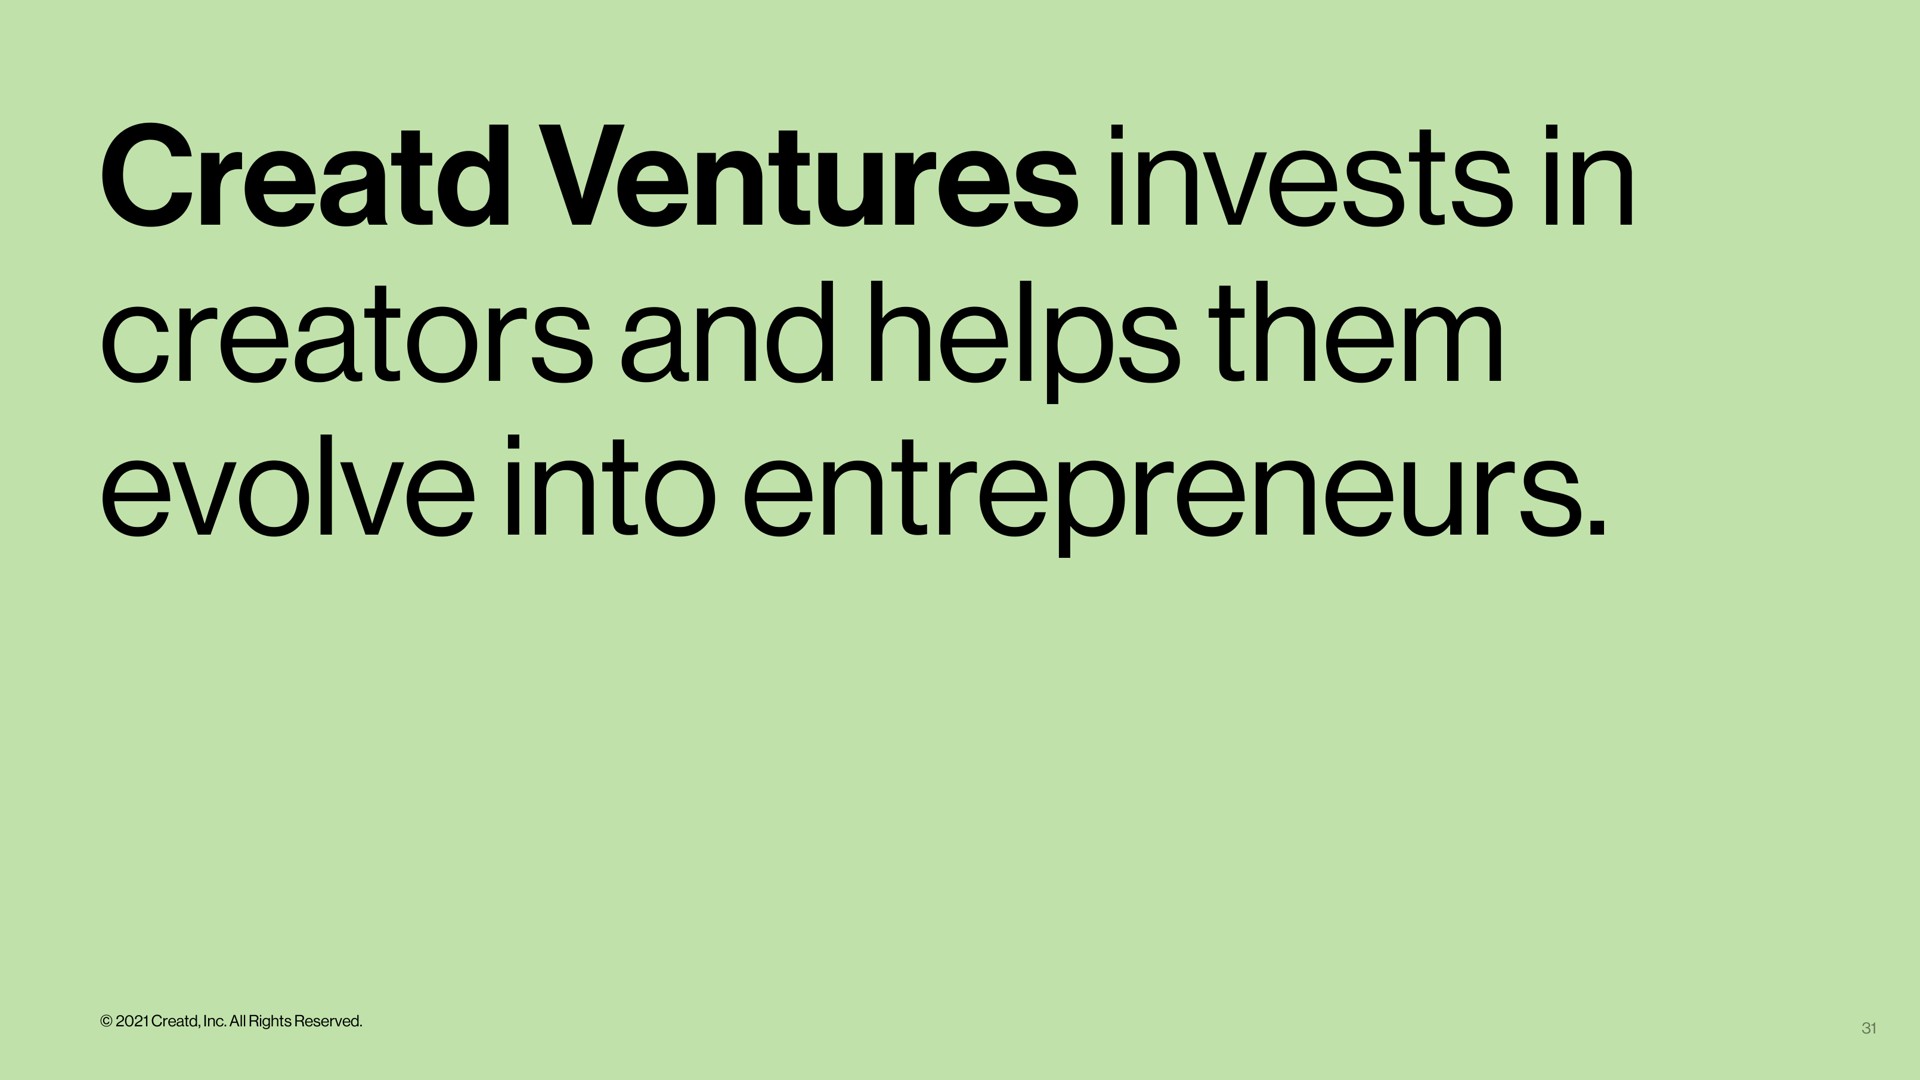 ventures invests in creators and helps them evolve into entrepreneurs | Creatd